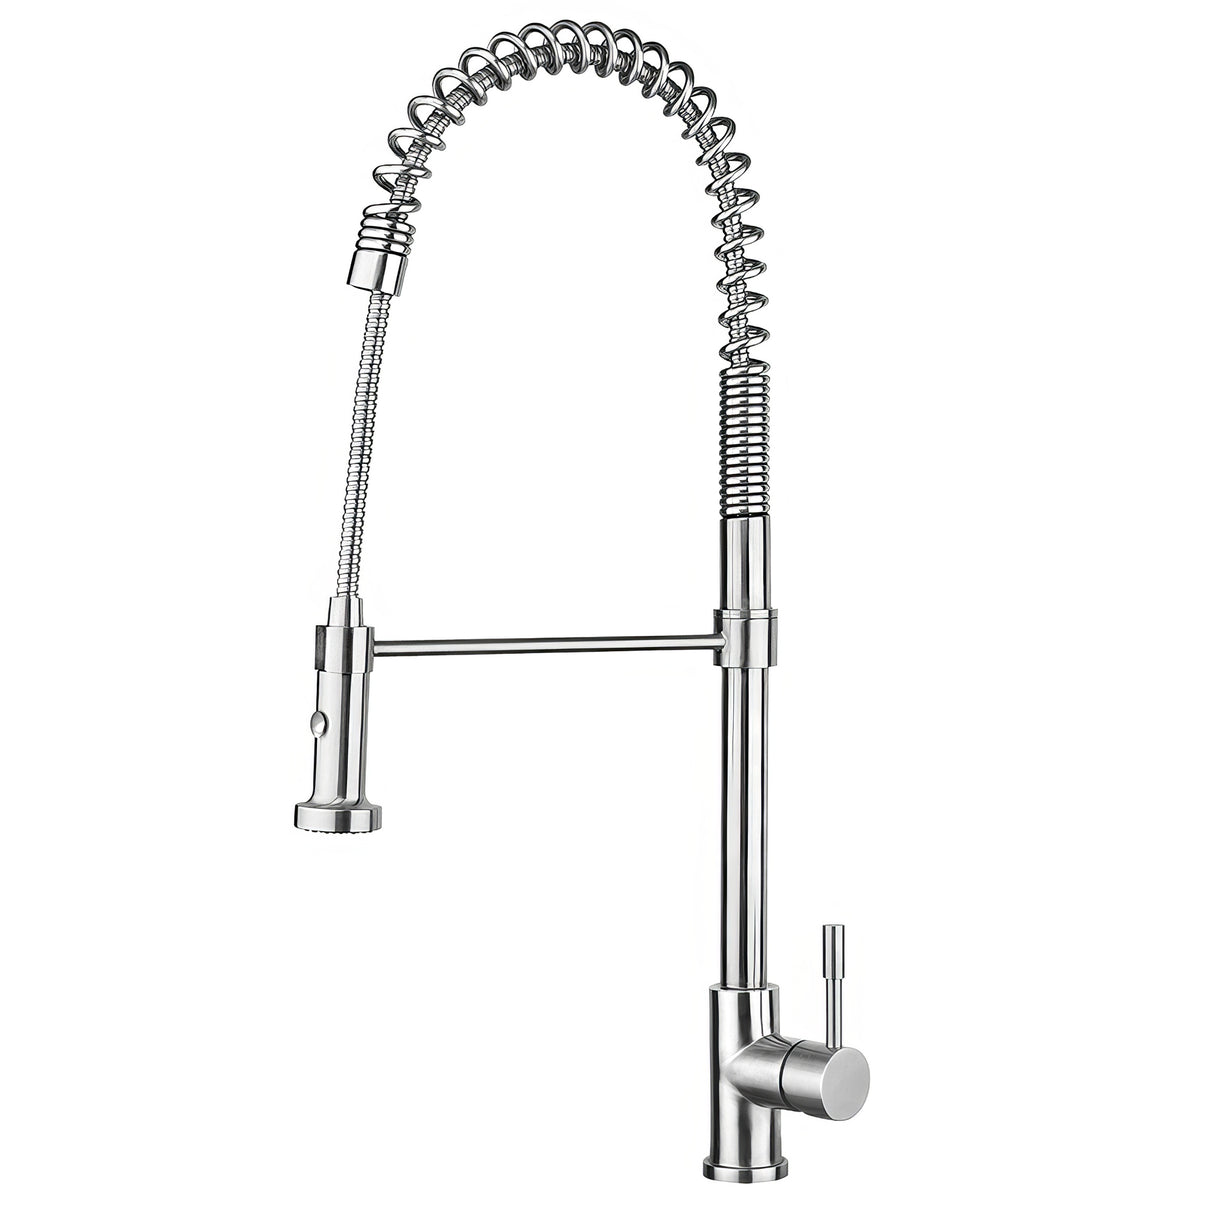 Waterhaus Lead Free, Solid Stainless Steel Commerical Single-Hole Faucet with Flexible Pull Down Spray Head, Swivel Spout Support Bar and Solid Lever Handle